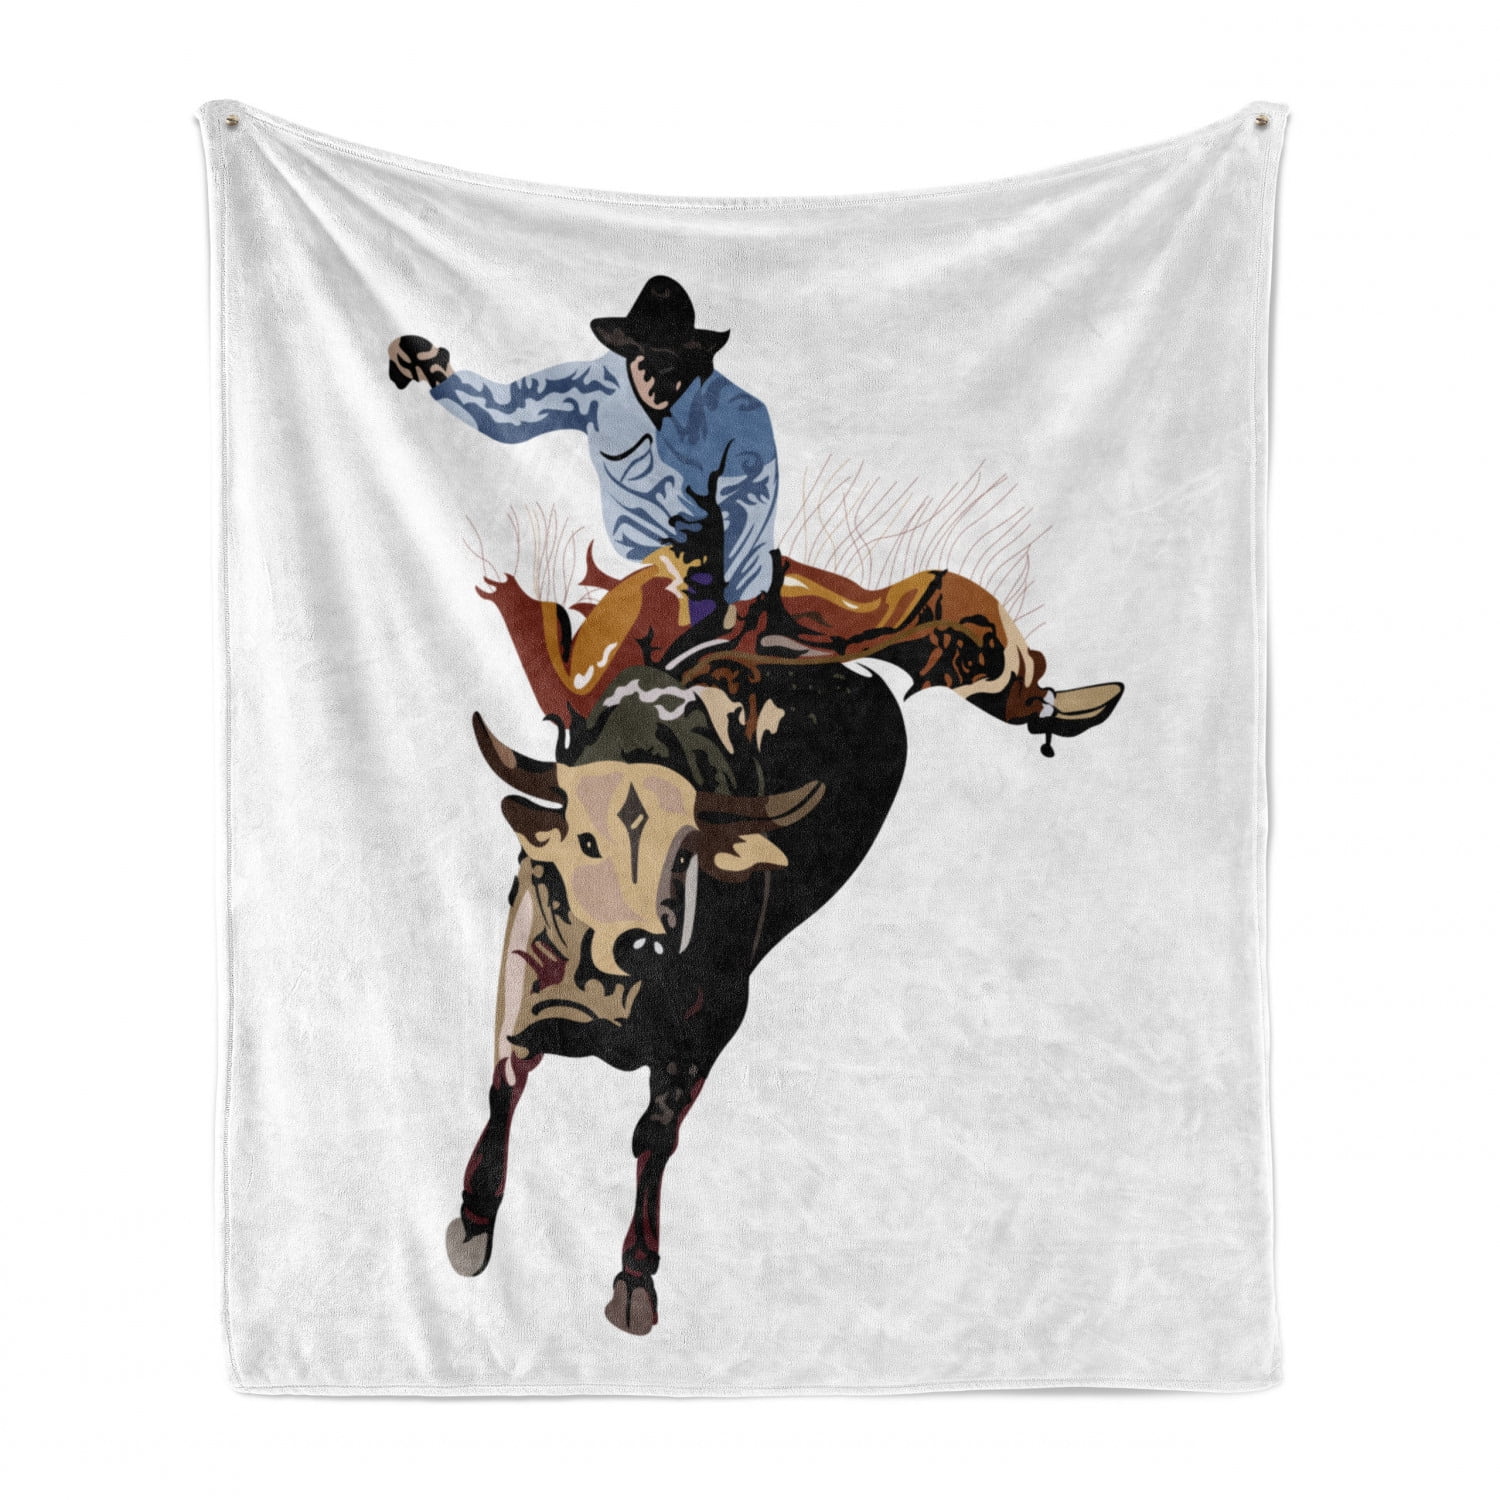 NEW RODEO COW HIDE Super Soft Light Weight Sherpa Luxury Throw Blanket 50" x 70" 